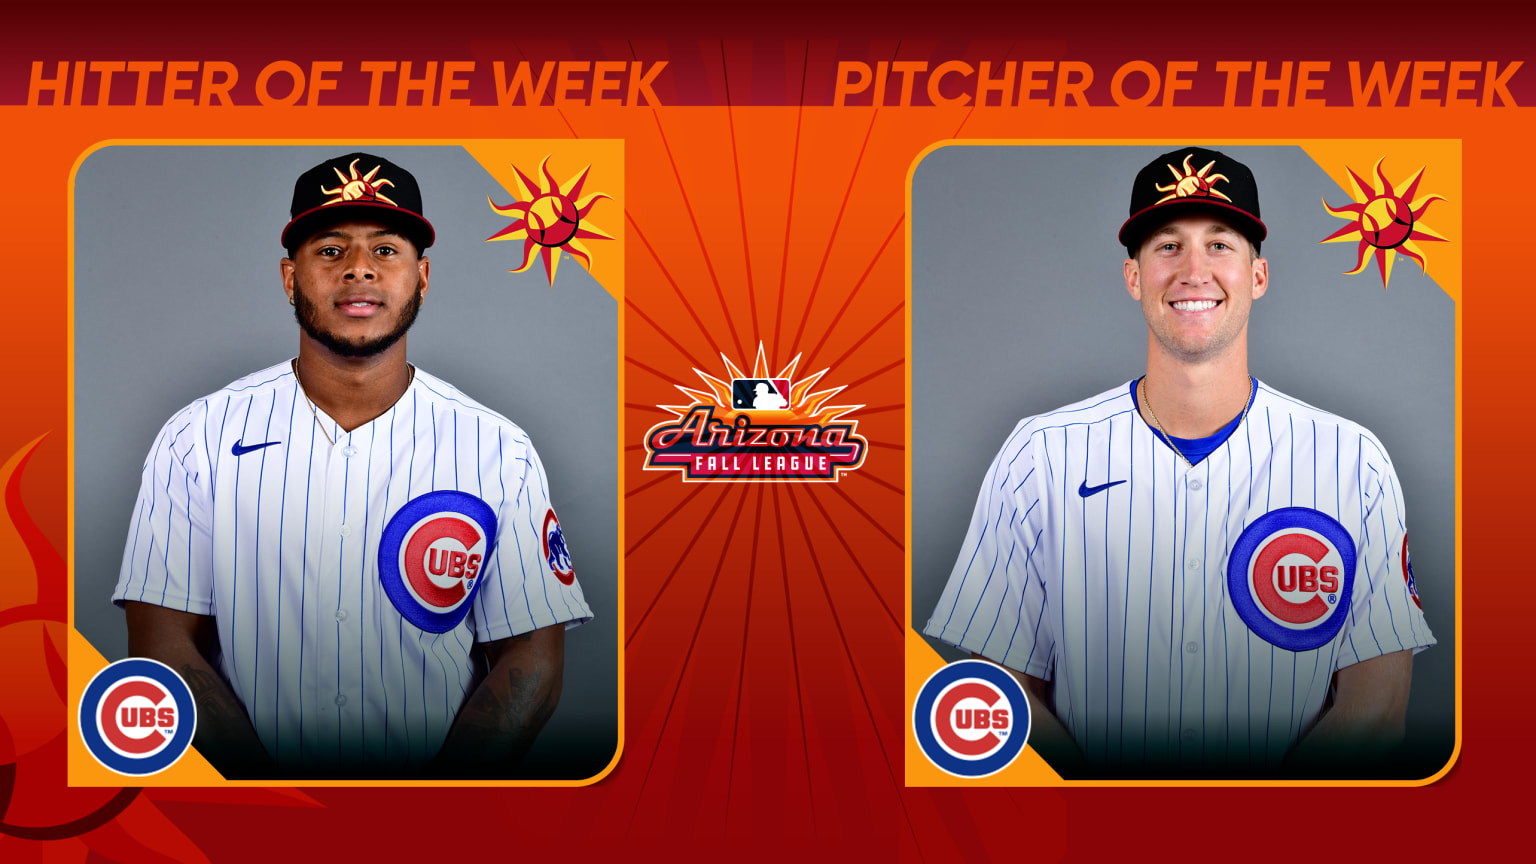 AFL pitcher of the week image